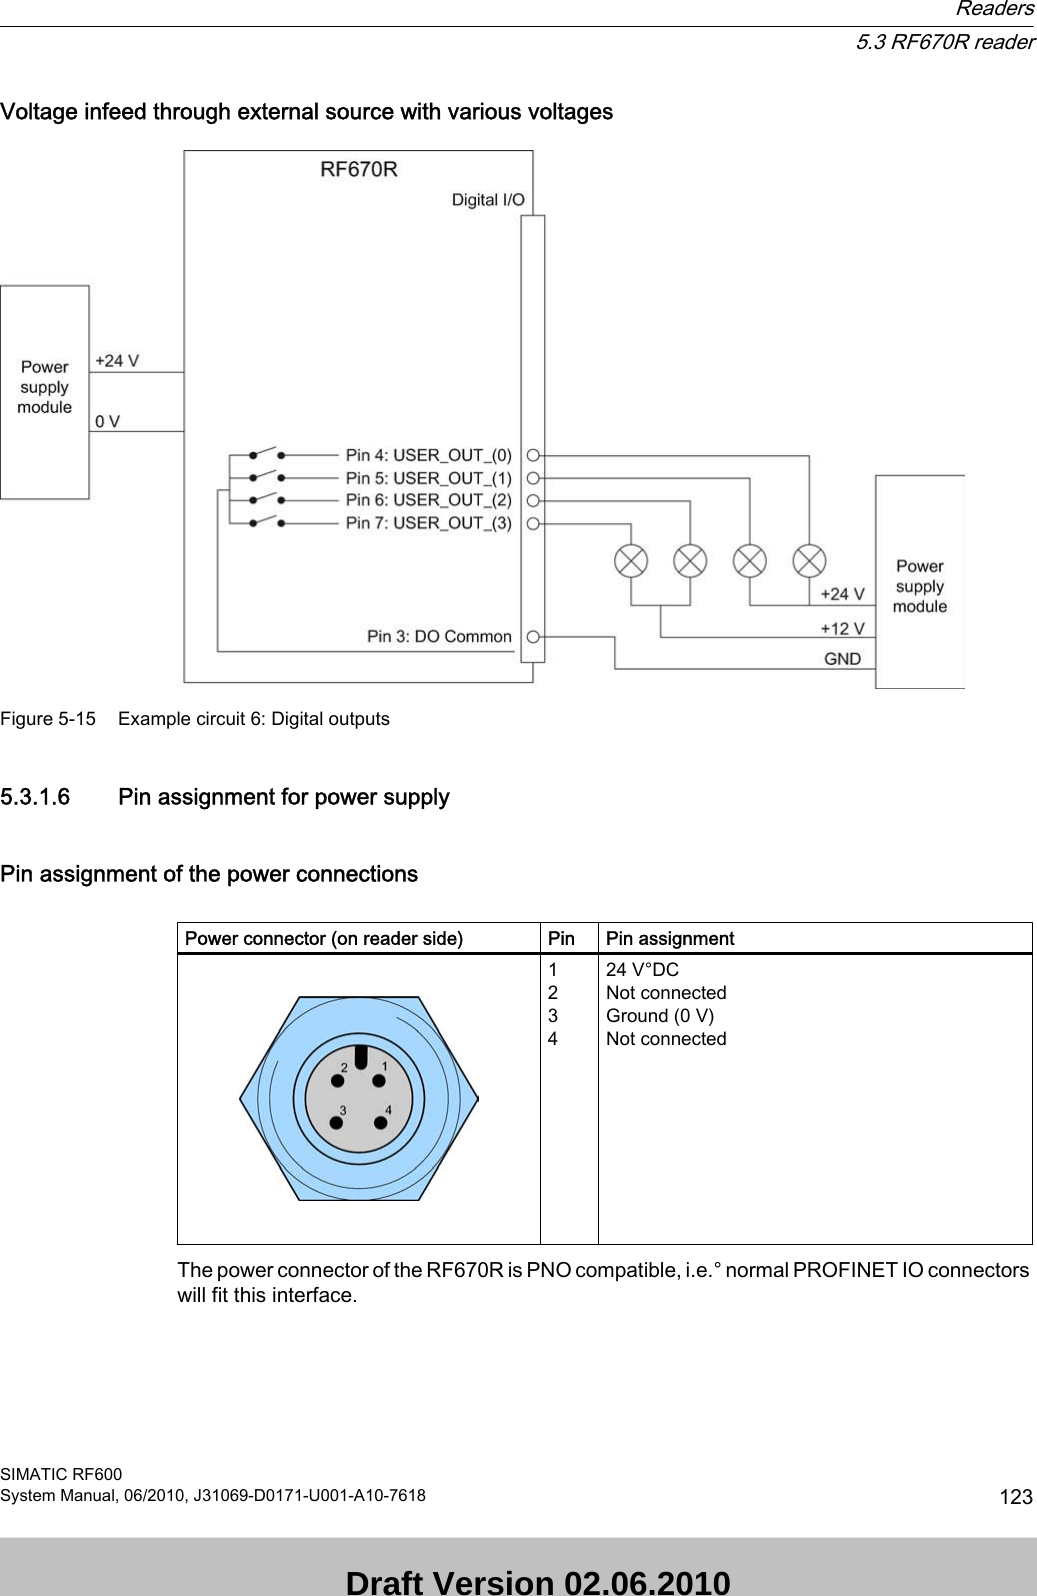 Voltage infeed through external source with various voltagesFigure 5-15 Example circuit 6: Digital outputs5.3.1.6 Pin assignment for power supplyPin assignment of the power connections  Power connector (on reader side) Pin Pin assignment    123424 V°DCNot connectedGround (0 V)Not connectedThe power connector of the RF670R is PNO compatible, i.e.° normal PROFINET IO connectors will fit this interface.  Readers5.3 RF670R readerSIMATIC RF600System Manual, 06/2010, J31069-D0171-U001-A10-7618 123 Draft Version 02.06.2010 